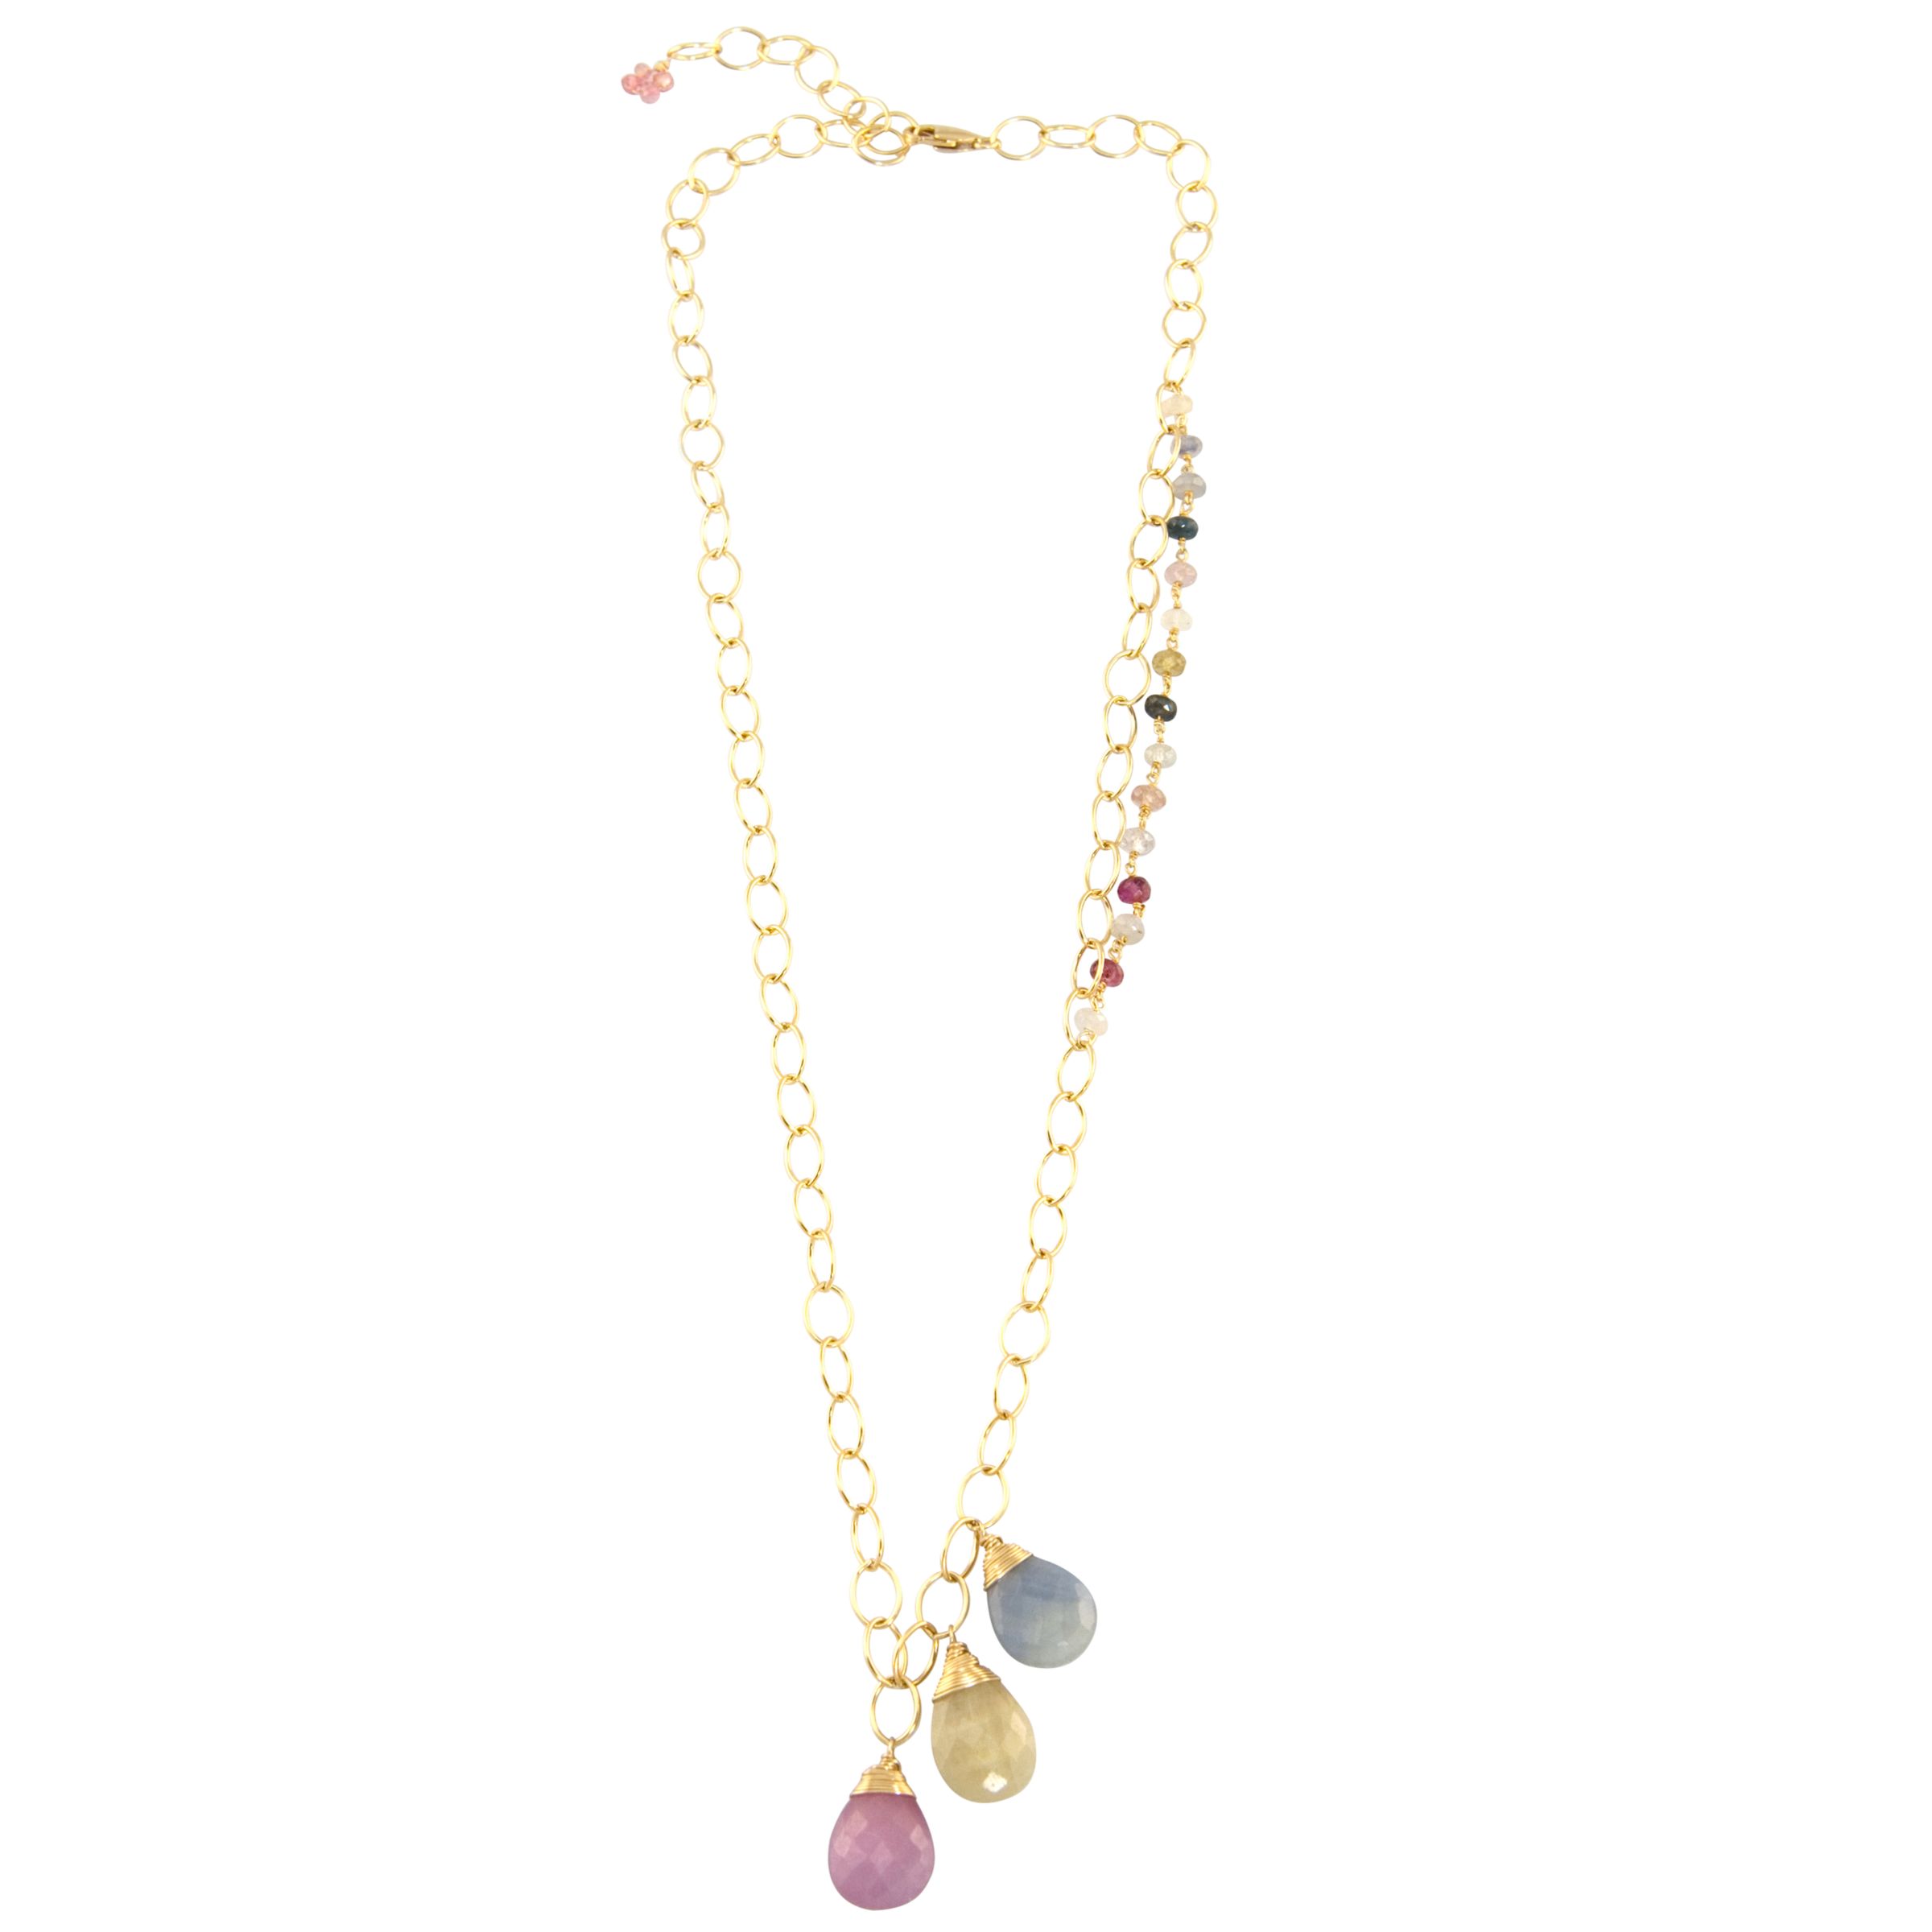 RueBelle 14ct Gold Filled & Sapphire 3 Colour Drops Necklace at John Lewis